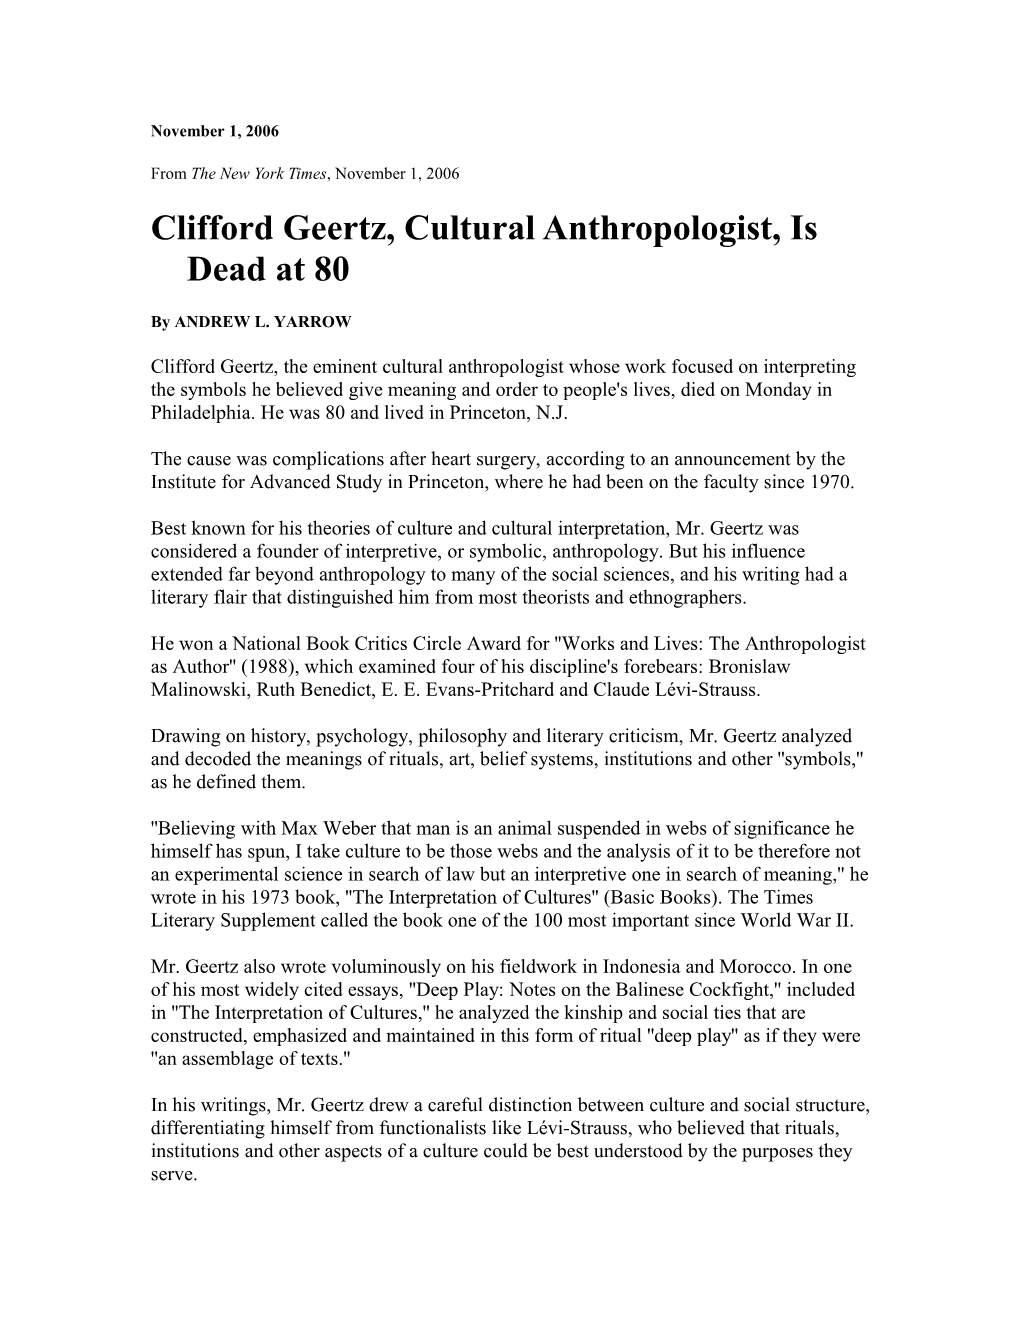 Clifford Geertz, Cultural Anthropologist, Is Dead at 80